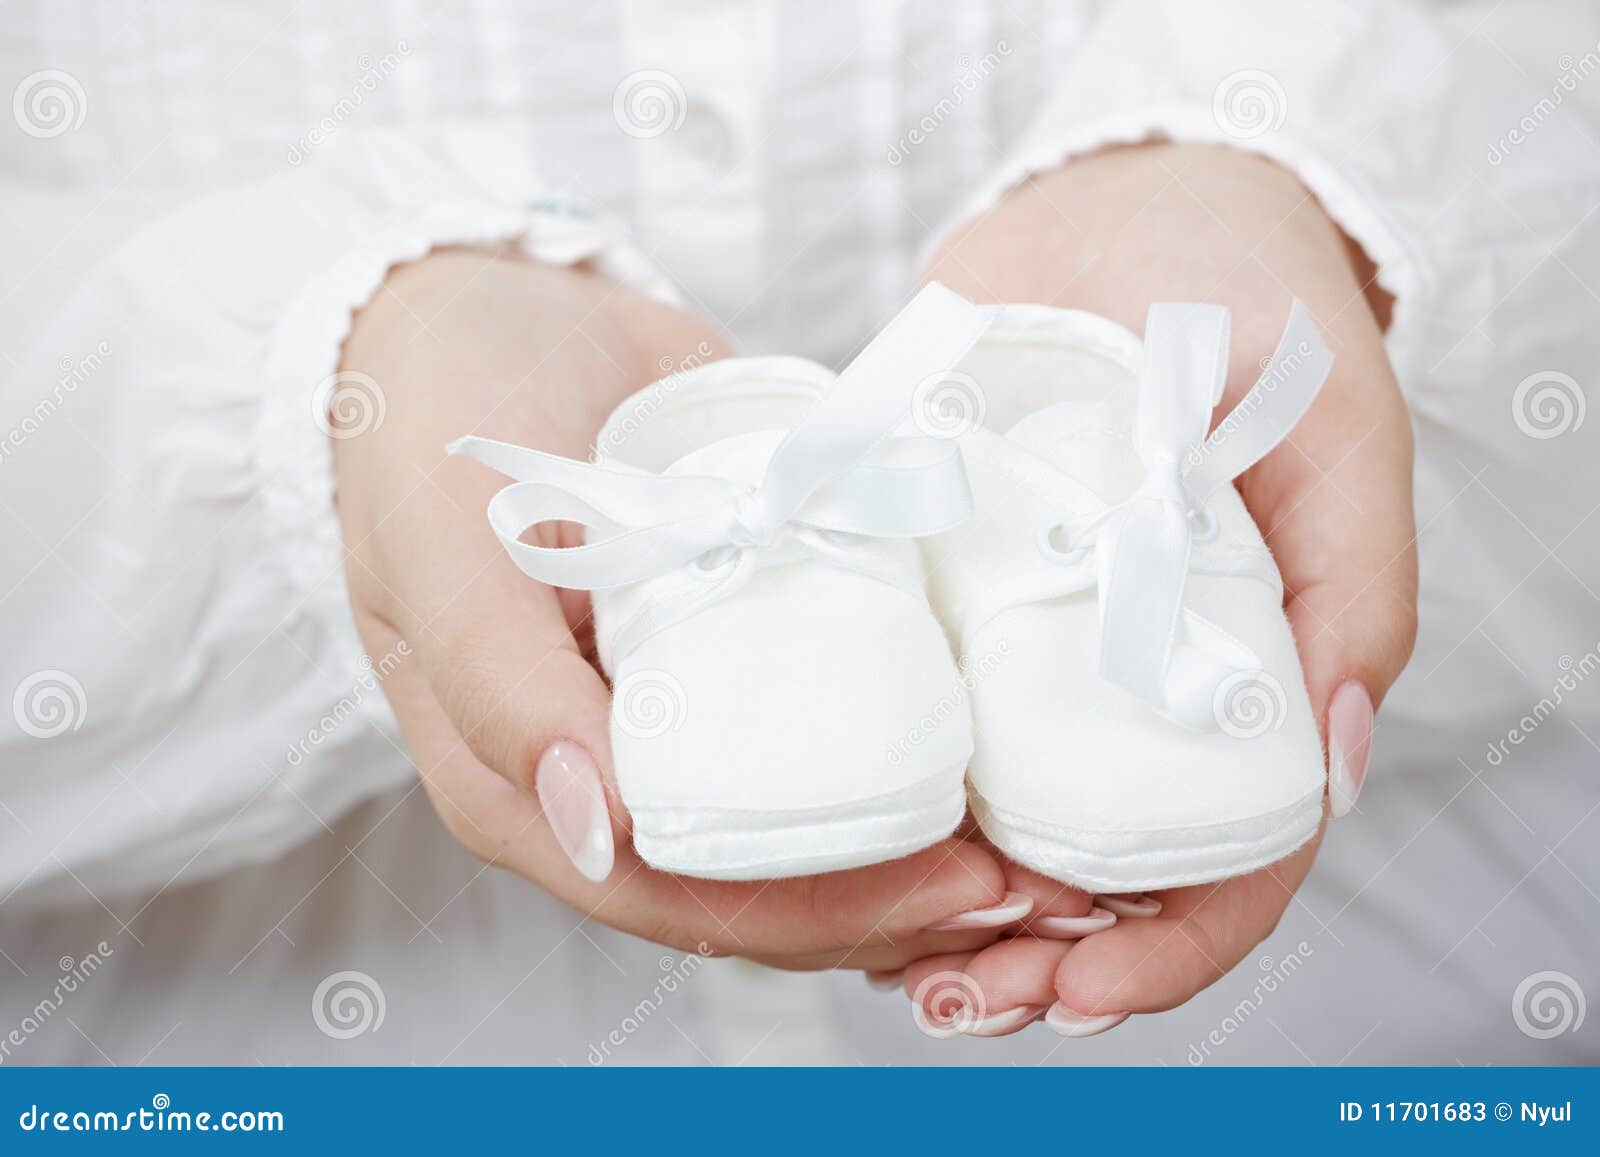 Little baby shoes stock image. Image of 